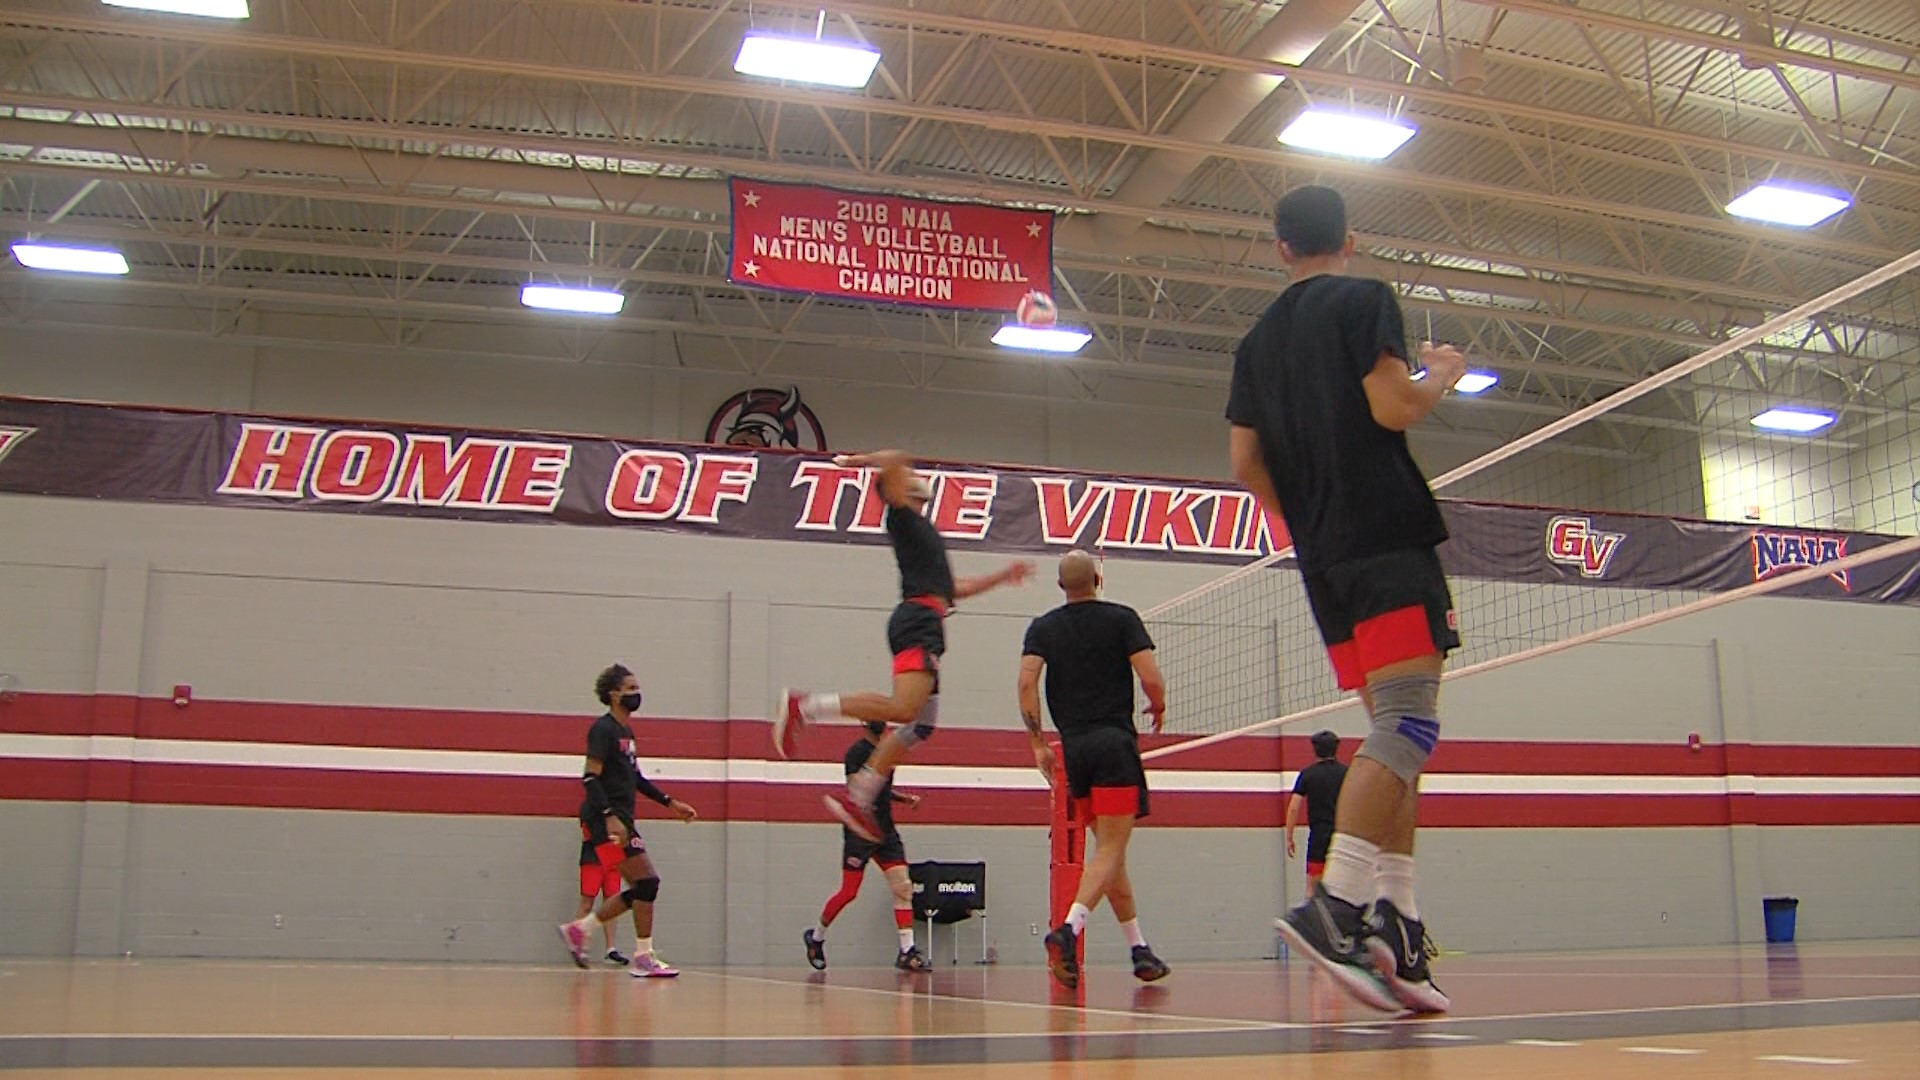 Grand View Men's Volleyball touts athletes from seven different countries. They all have one goal in their sights.